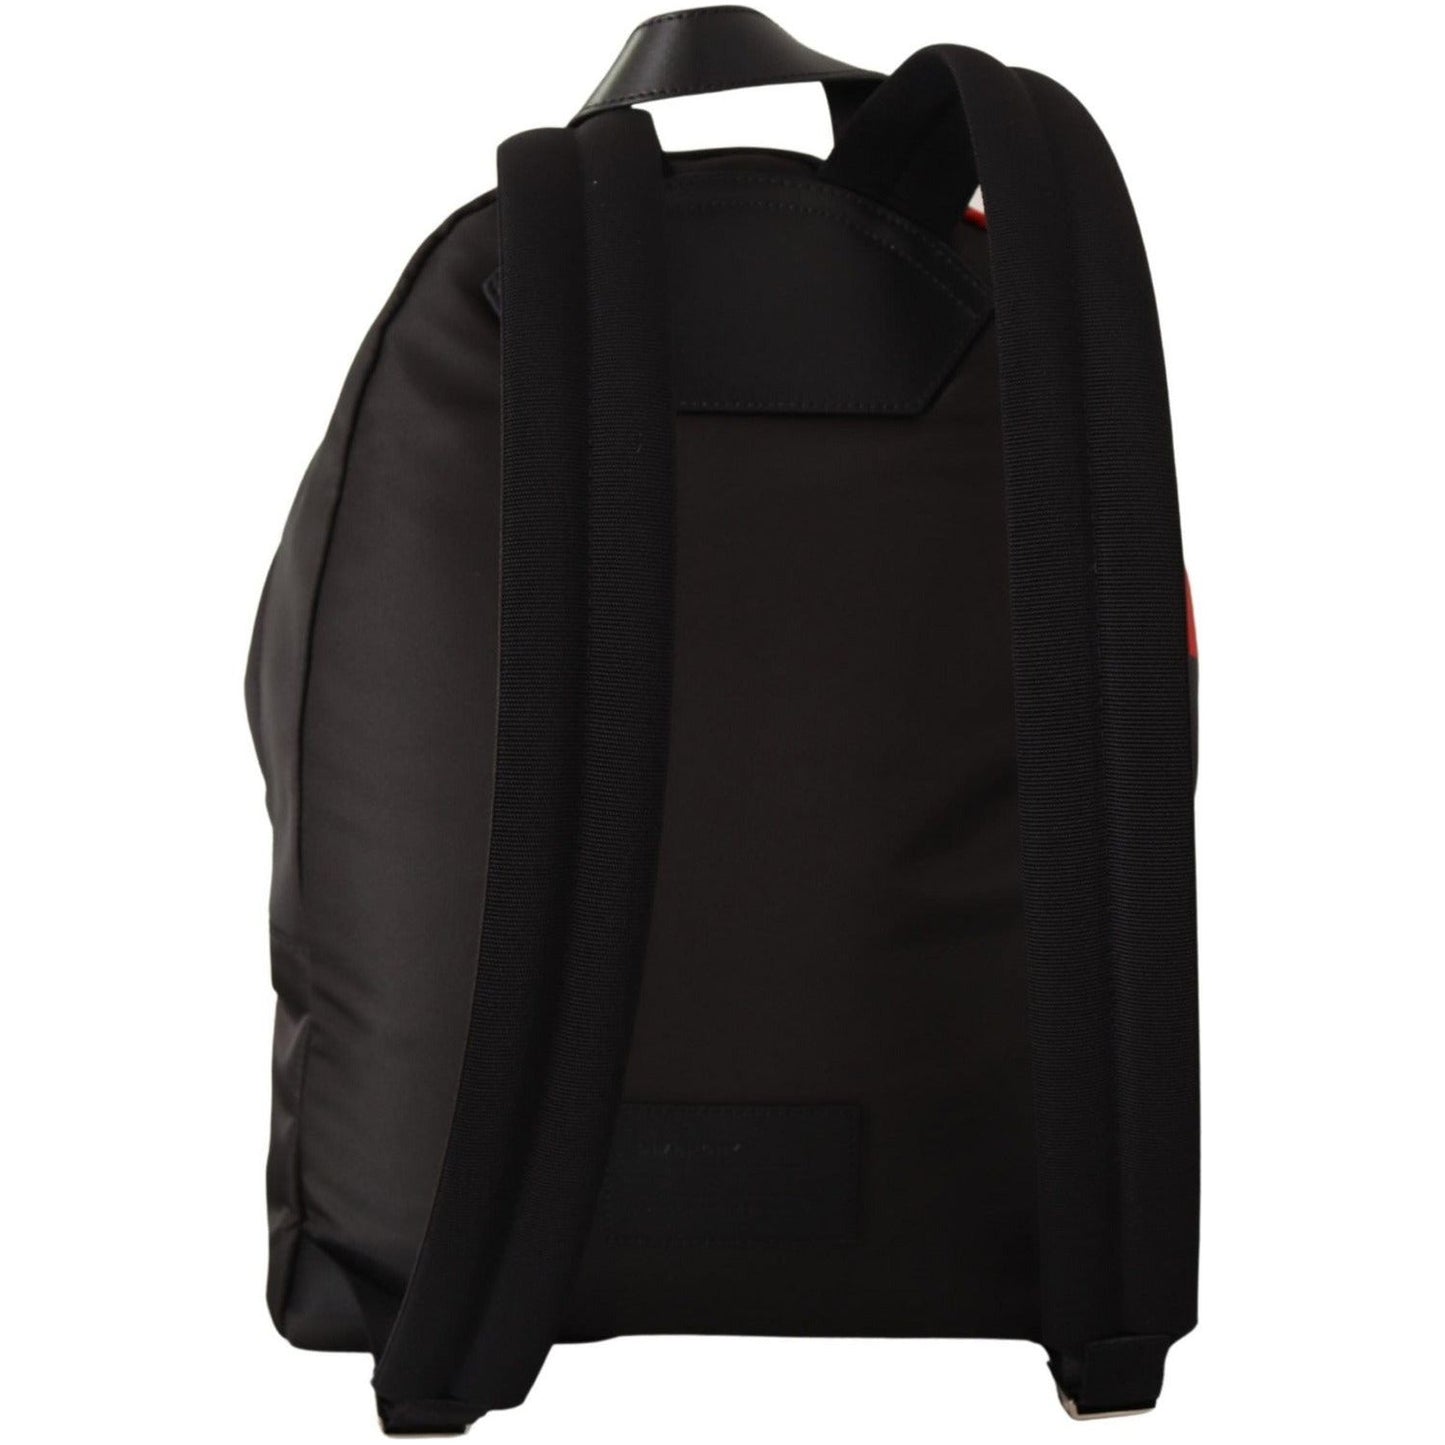 Givenchy Sleek Urban Backpack in Black and Red red-black-nylon-urban-backpack